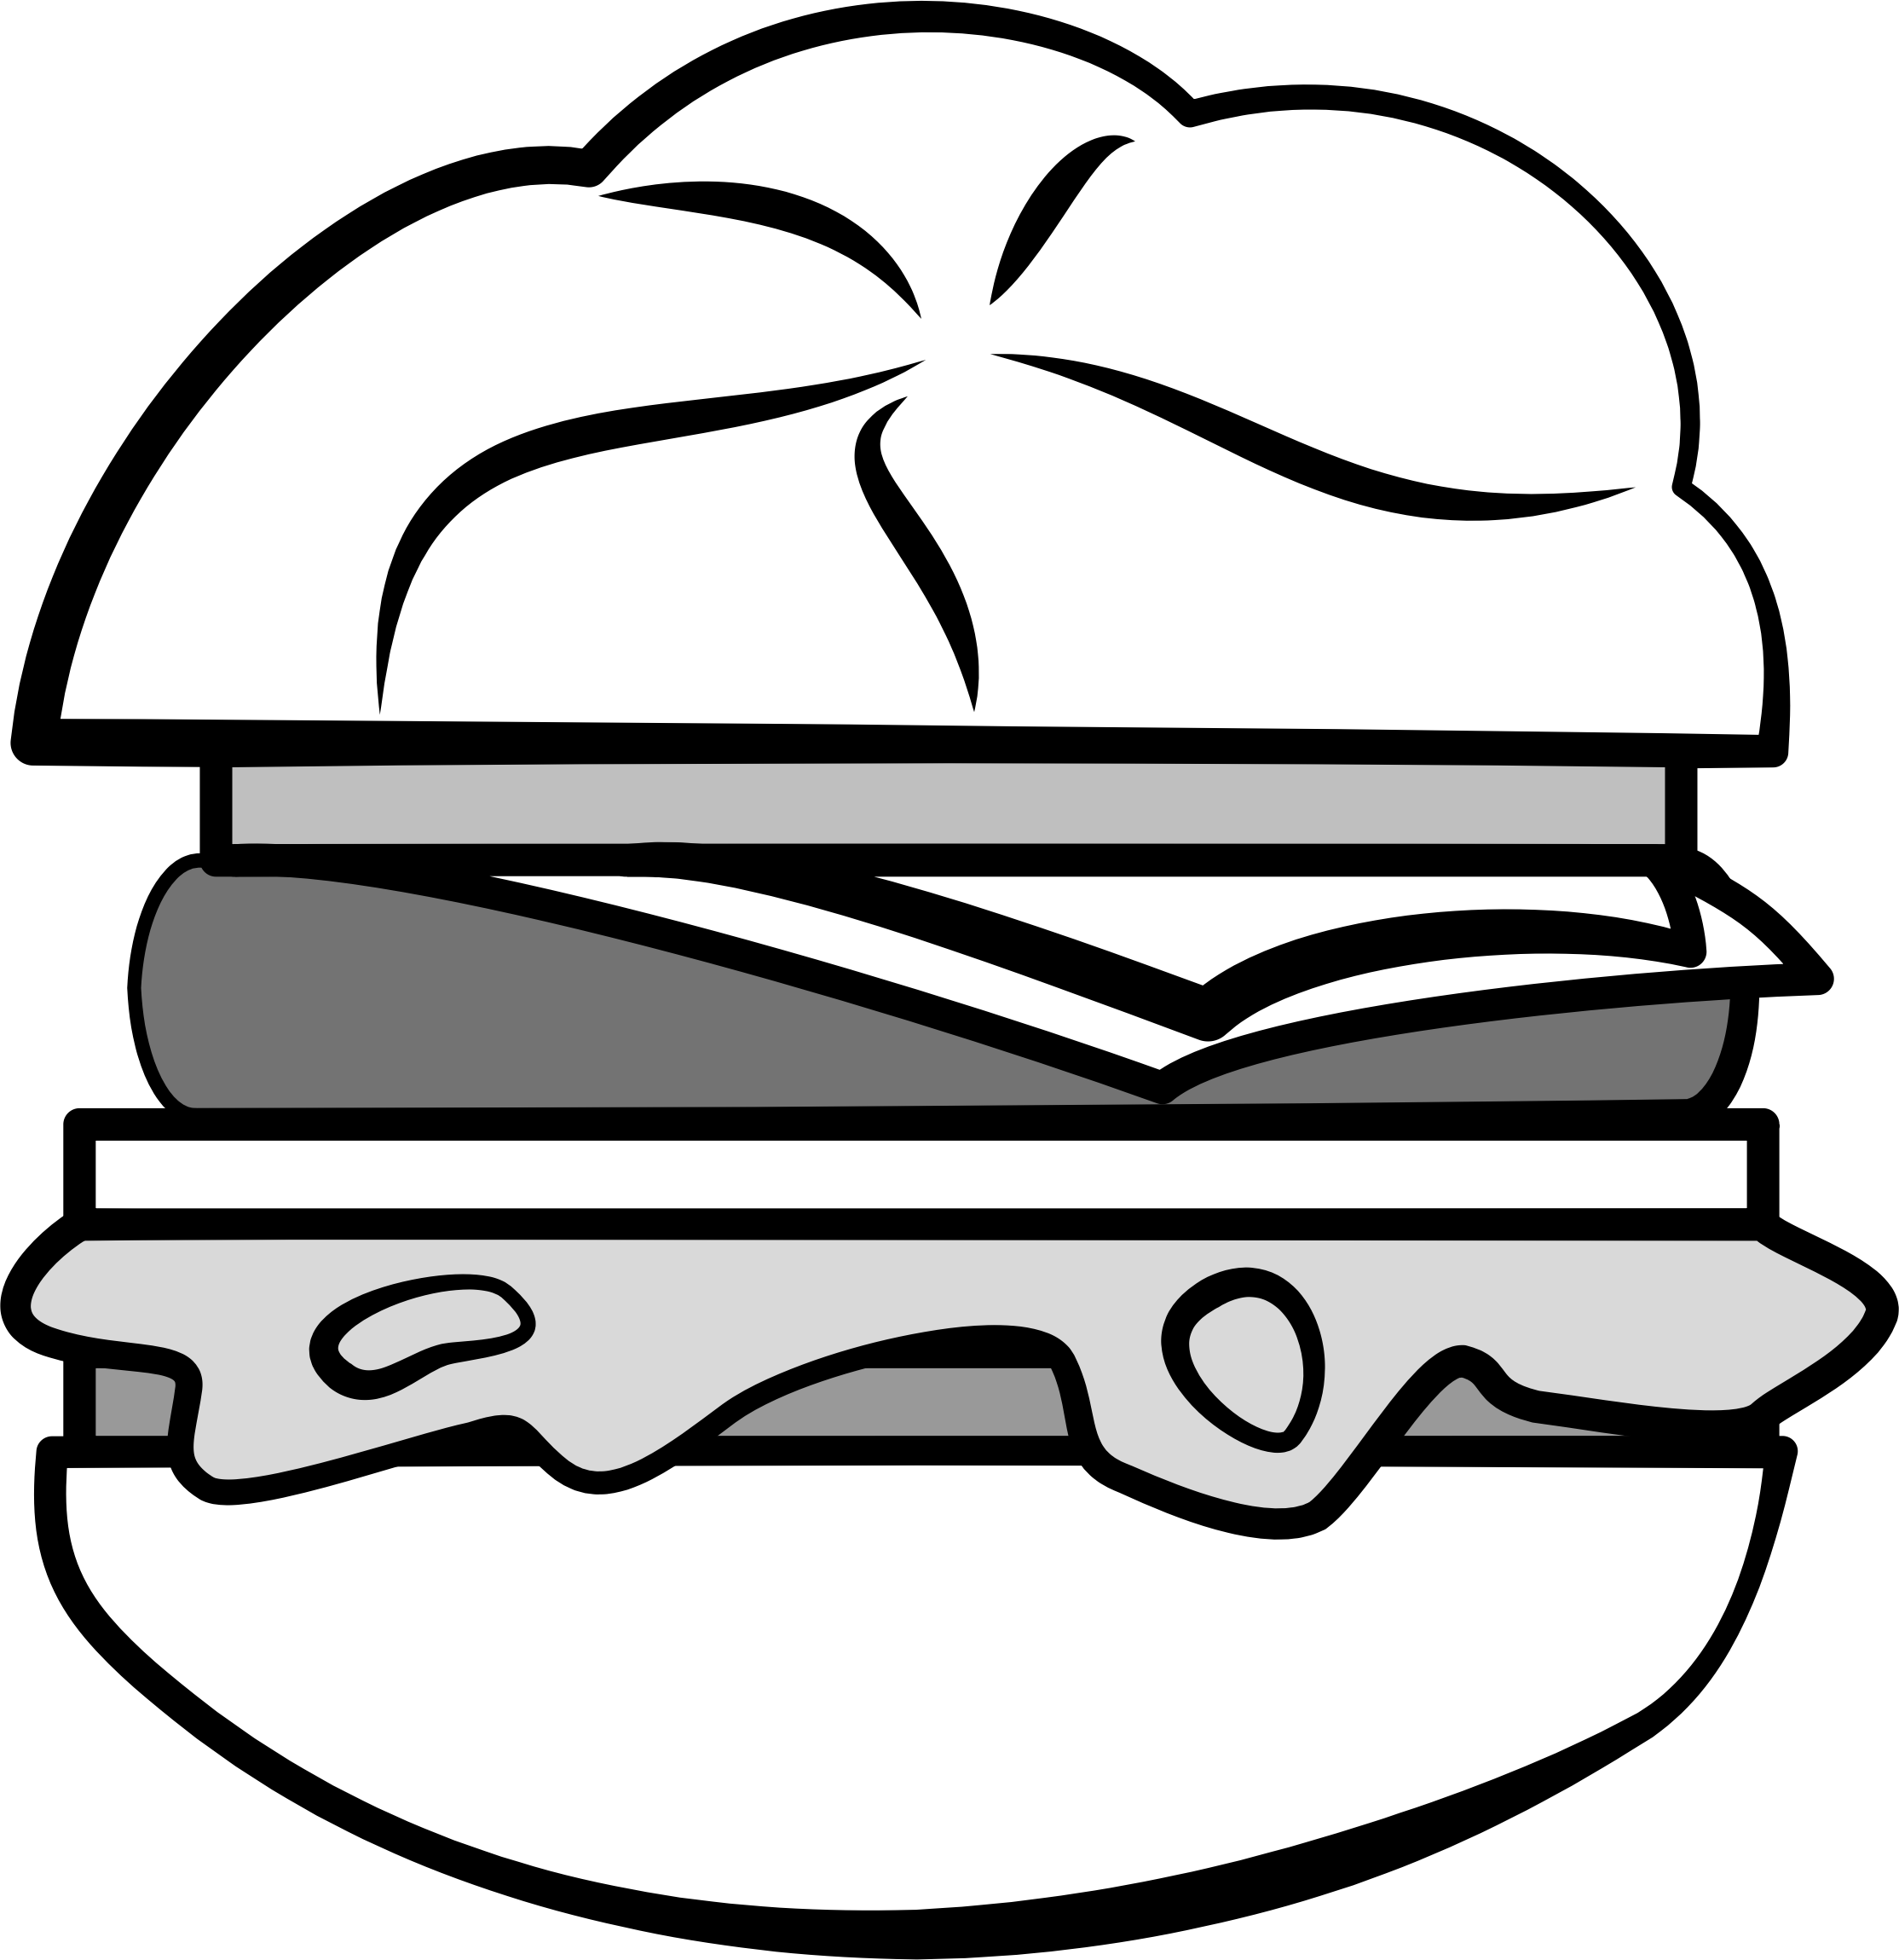 Hamburger clipart black and white. Another big image png